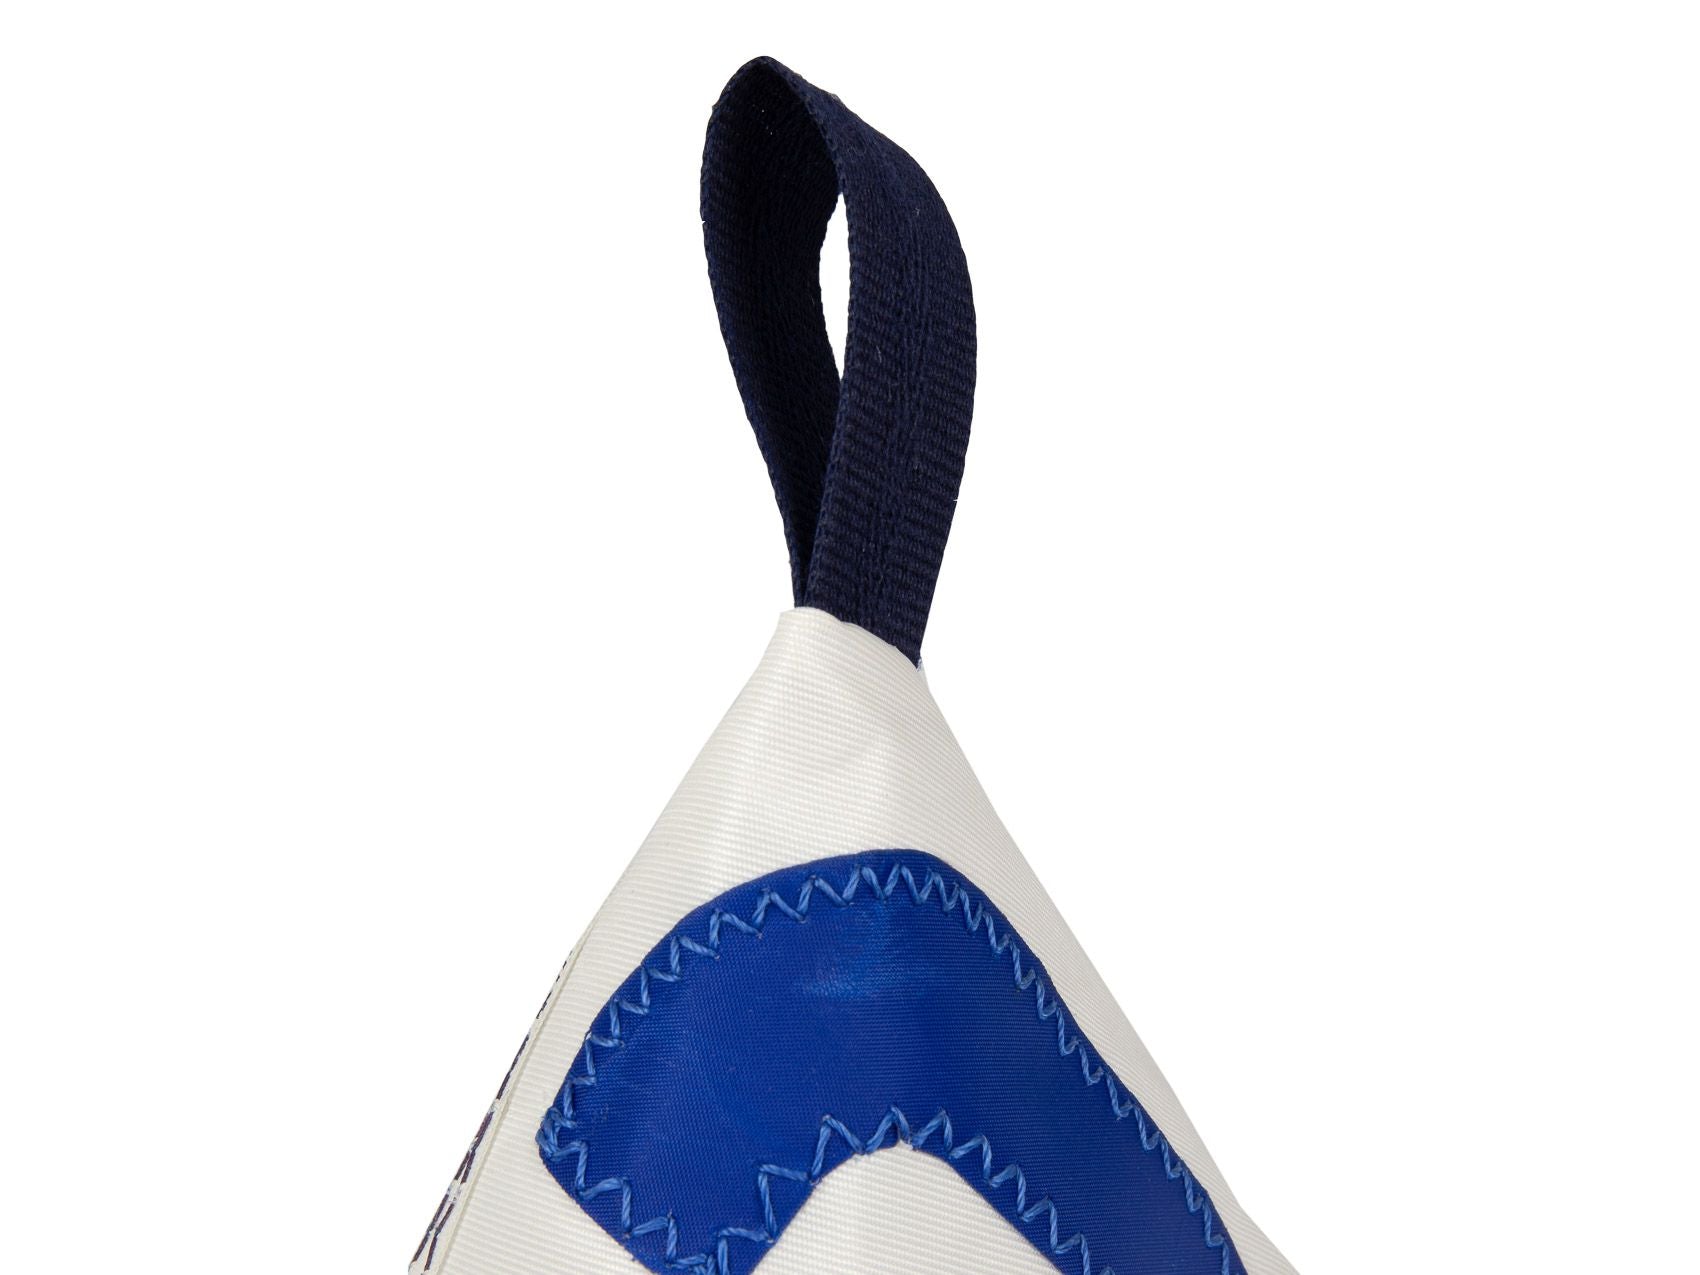 Made of white and blue Dacron sail and navy canvas, and adorned with an oversized blue number '3', this pyramid-shaped door stopper will add a splash of colour and nautical character to your interior!